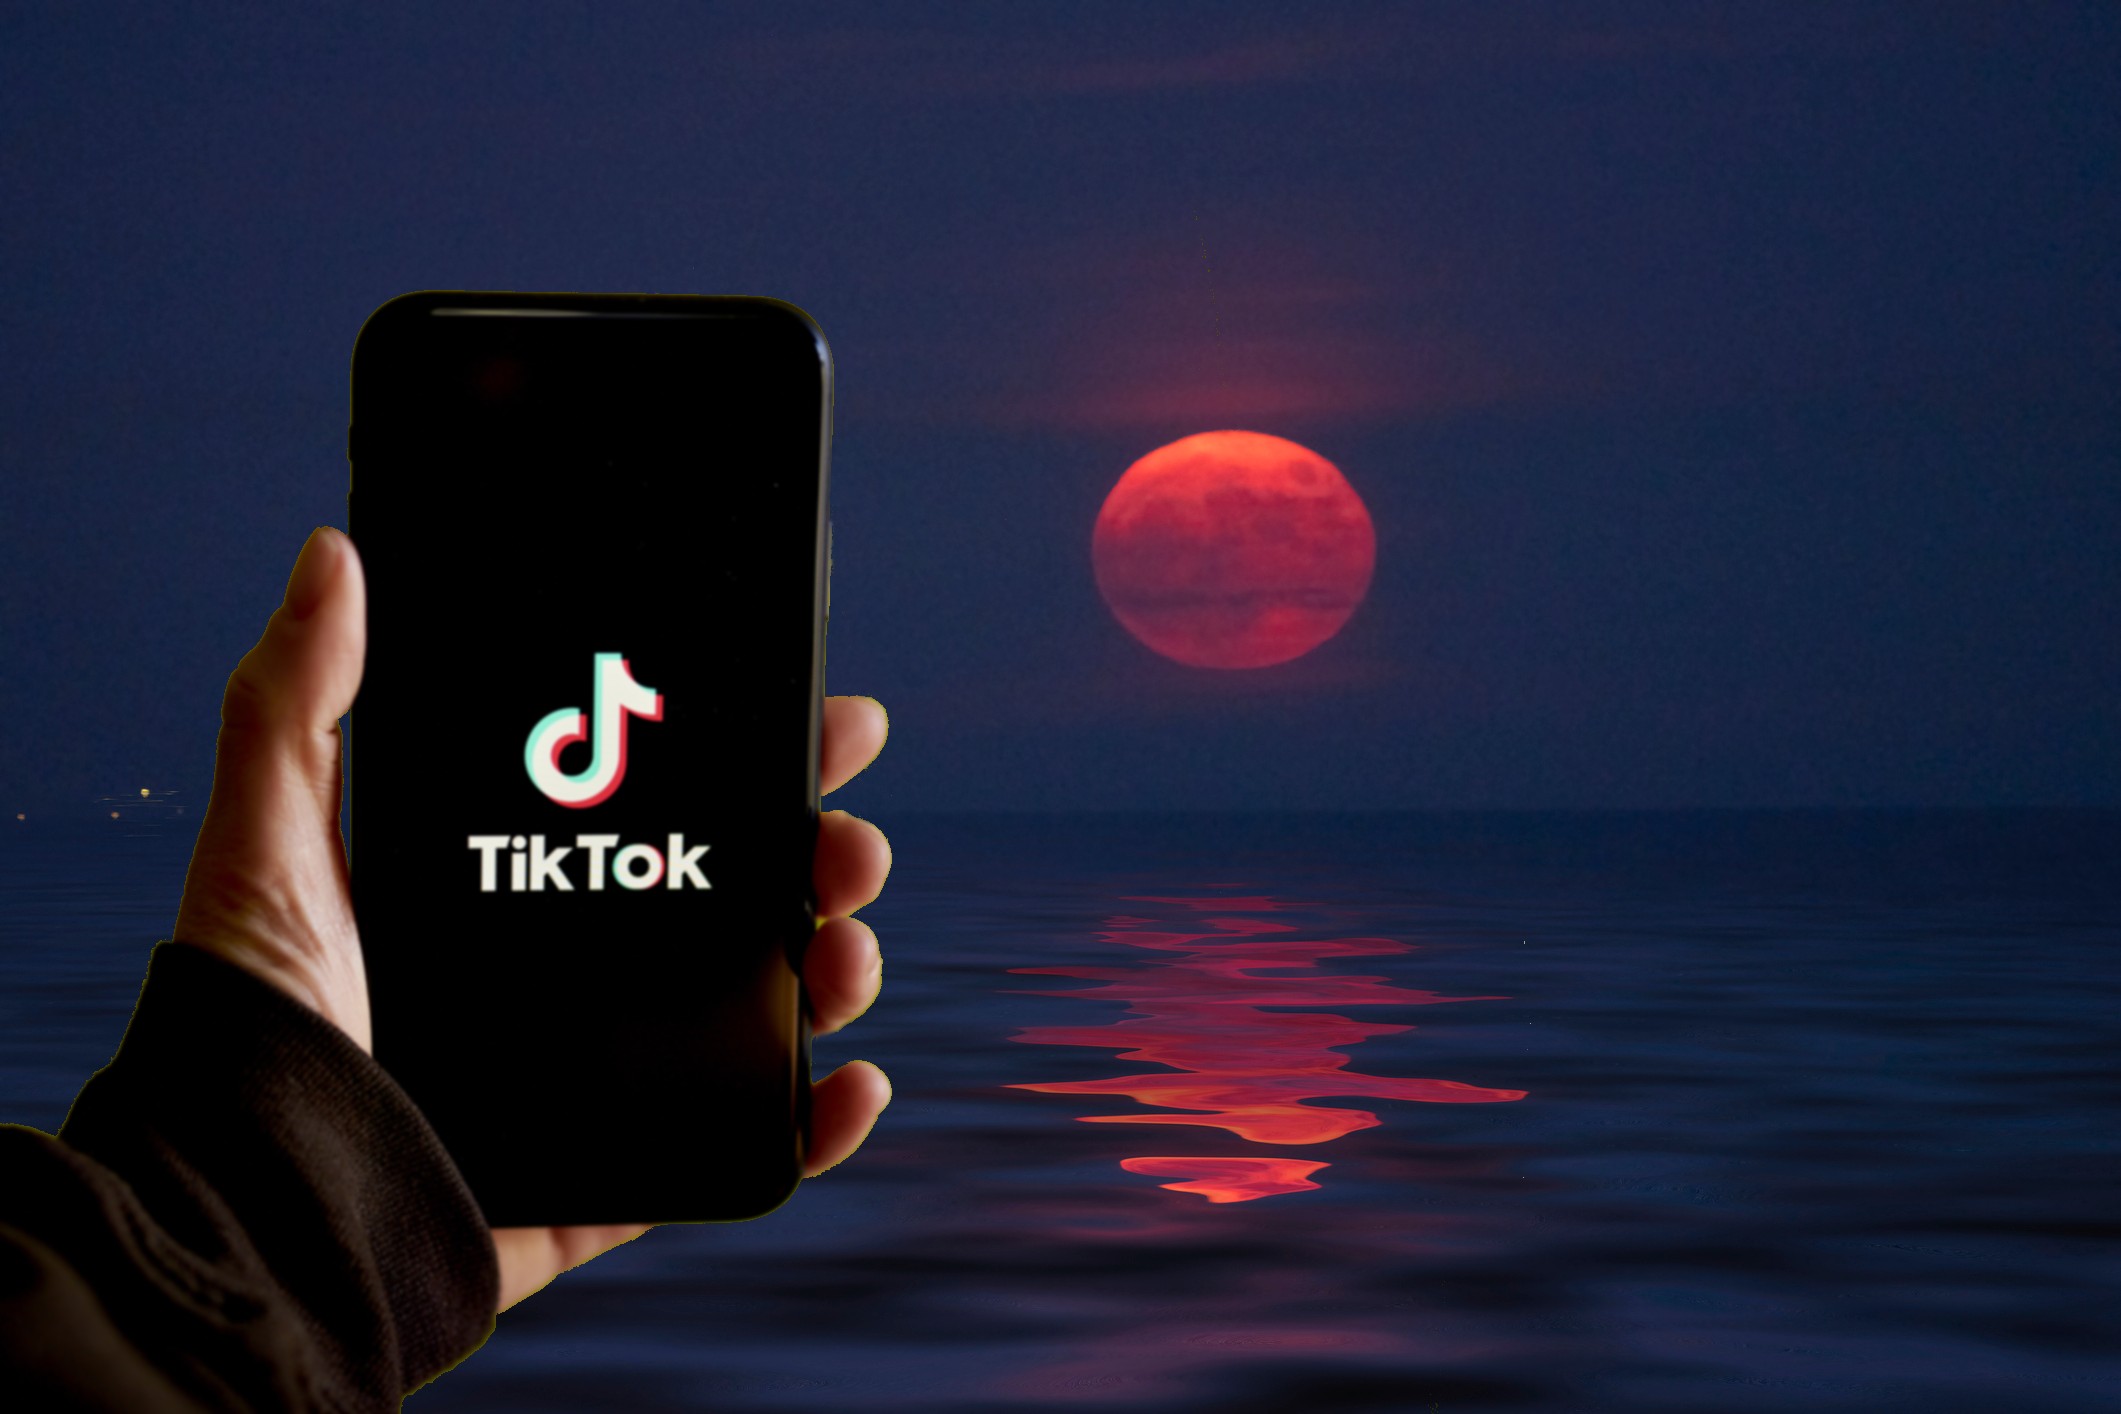 How to do the moon phase TikTok trend